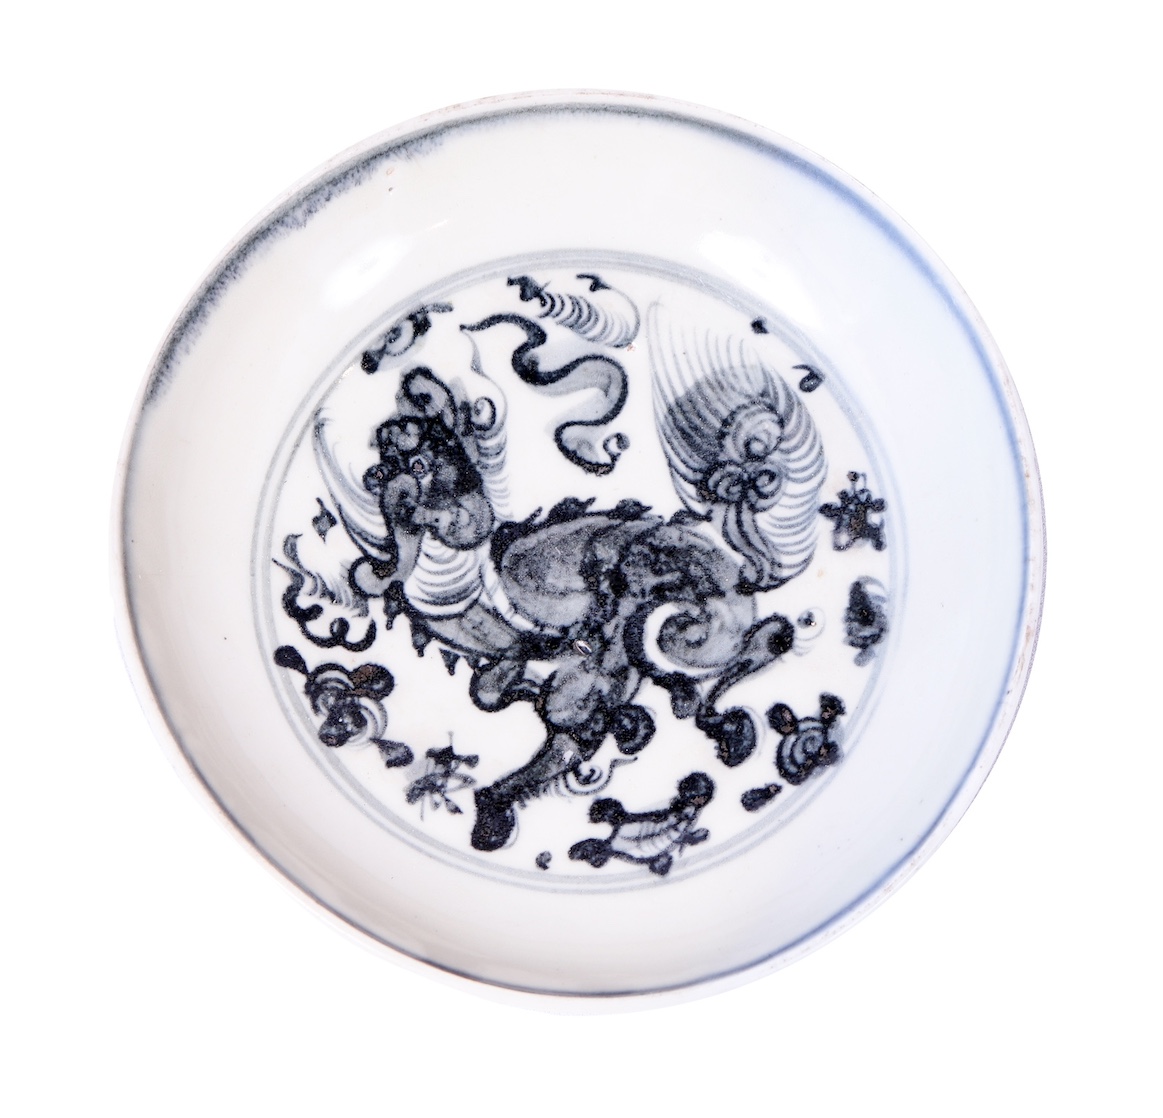 A 15th - 16th century Ming blue and white dish painted with qilin